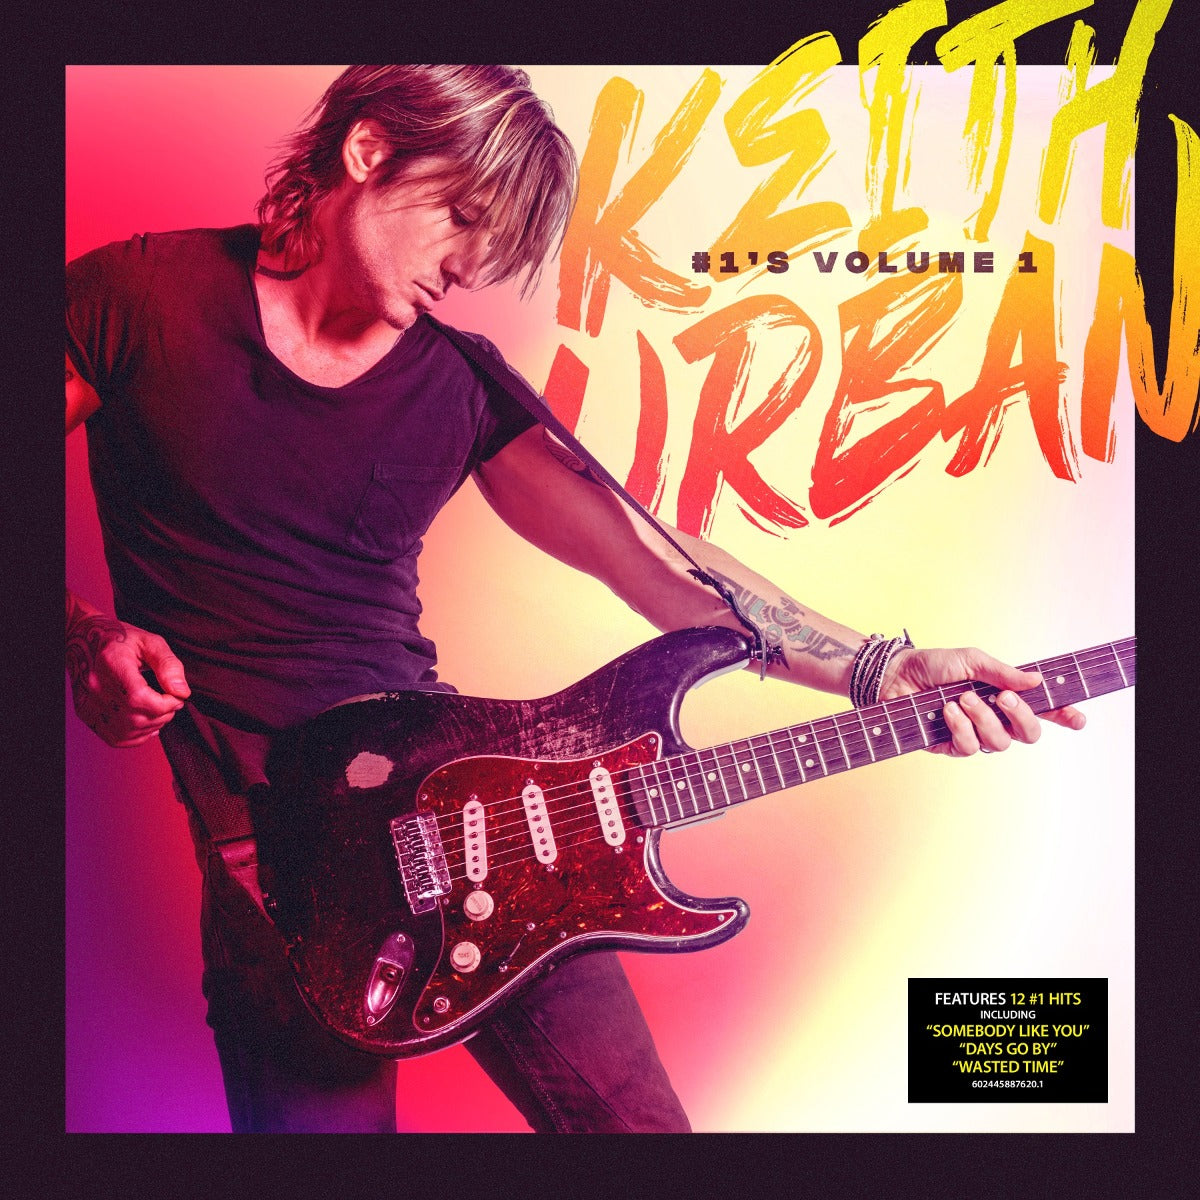 Keith Urban | Keith Urban - #1's Volume 1 (Limited Edition, Coke Bottle Green, Clear Vinyl, Poster) | Vinyl - 0